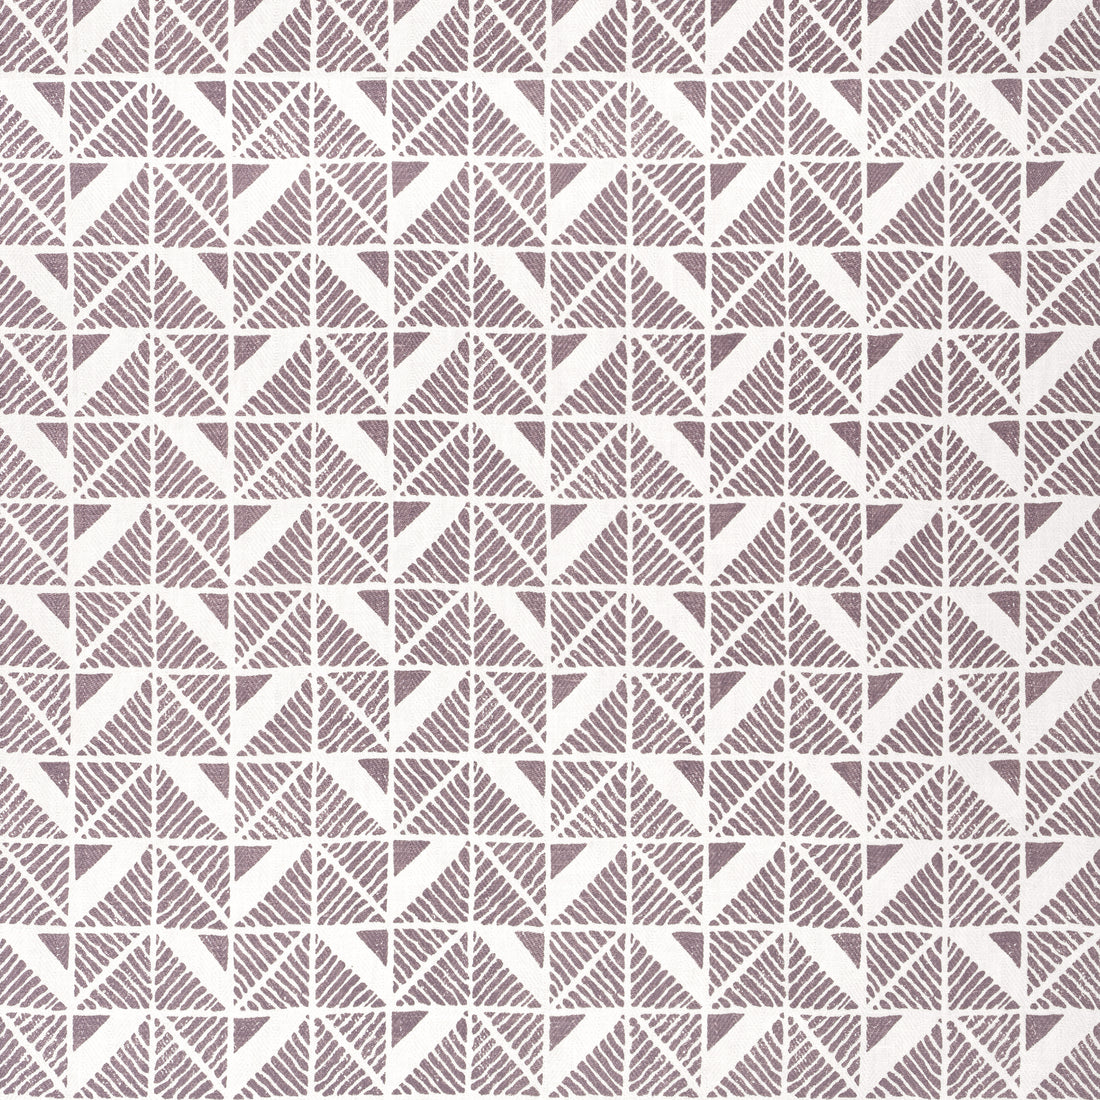 Bloomsbury Square fabric in plum color - pattern number AF23116 - by Anna French in the Willow Tree collection